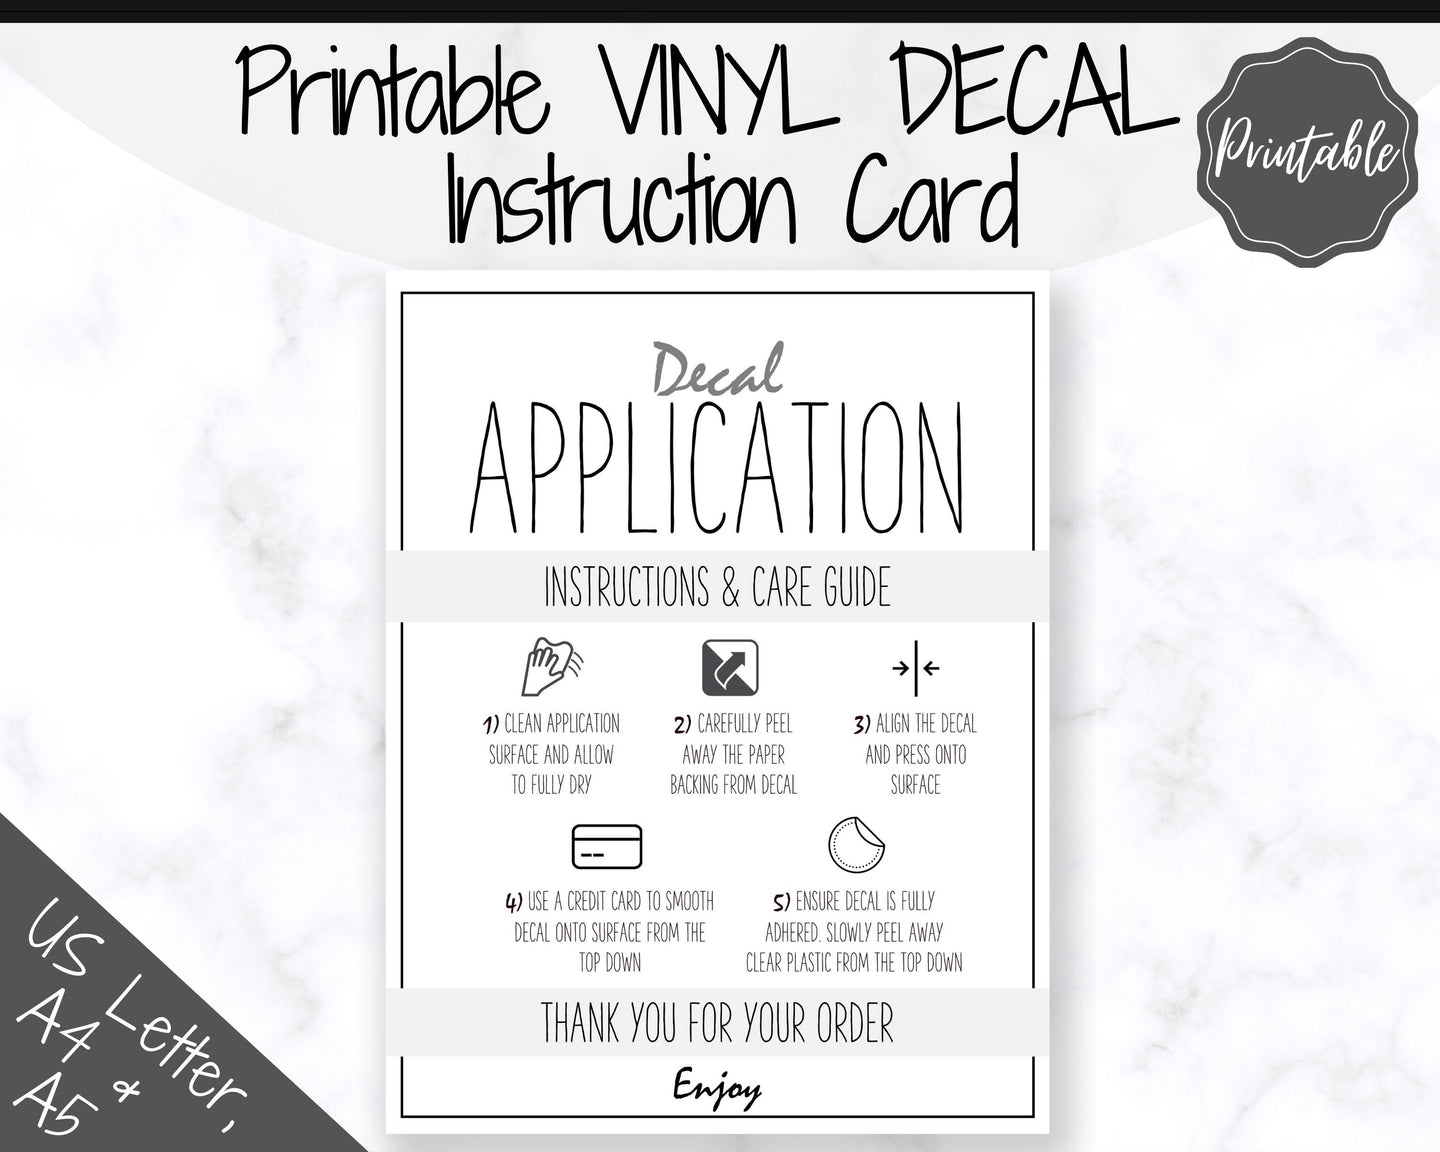 Printable Vinyl Decal Care Card Instructions. Decal Application Order Card, DIY Sticker Seller Packaging Label, Vinyl Decal Care Cards | Grey